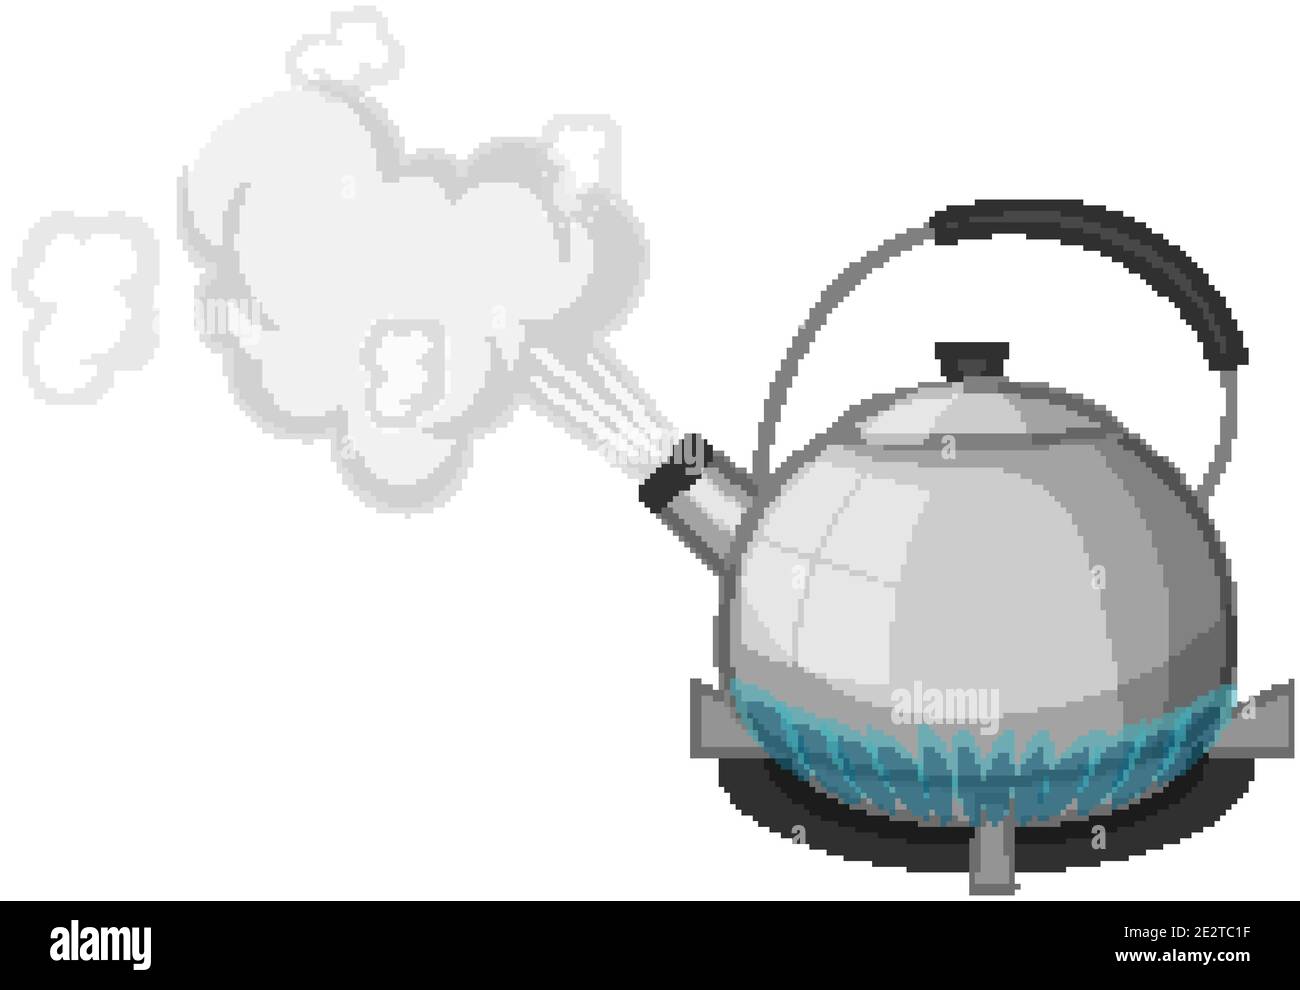 https://c8.alamy.com/comp/2E2TC1F/stainless-steel-kettle-with-boiling-water-on-stove-cartoon-style-isolated-on-white-background-illustration-2E2TC1F.jpg